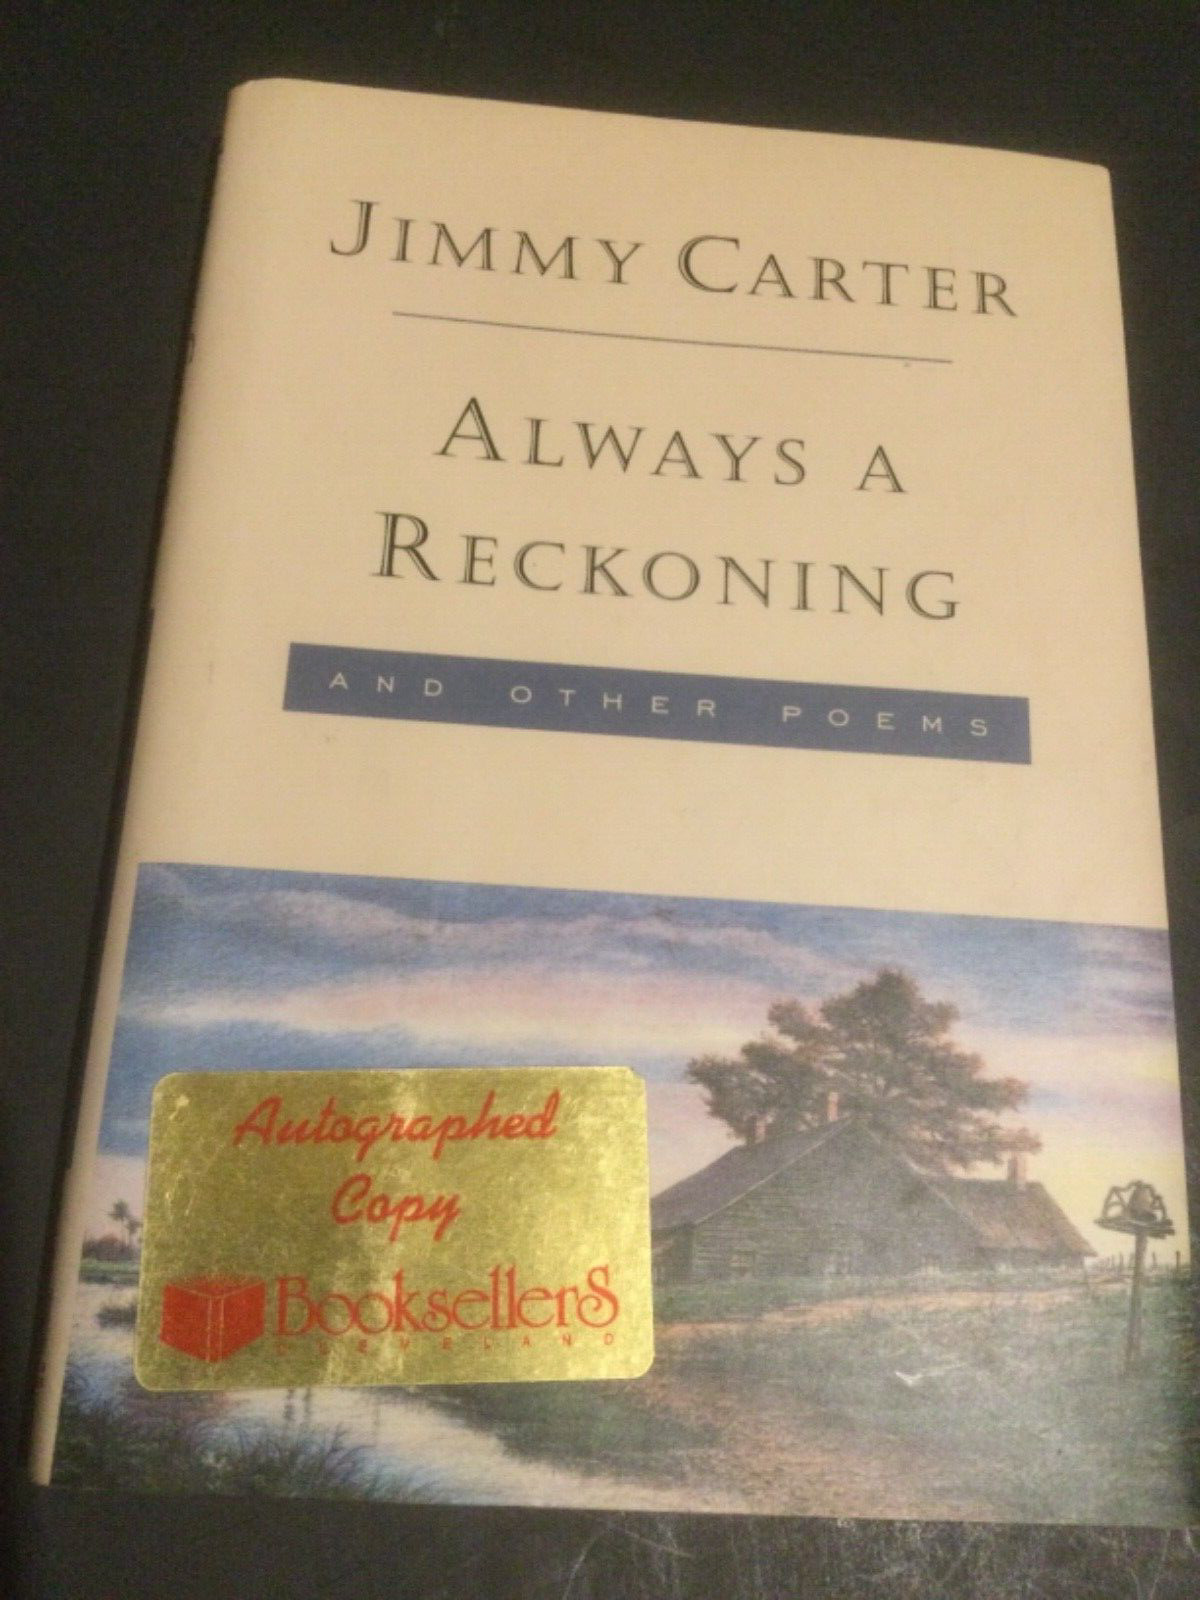 PRESIDENT JIMMY CARTER SIGNED BOOK ALWAYS A RECKONING and other POEMS - SIGNED